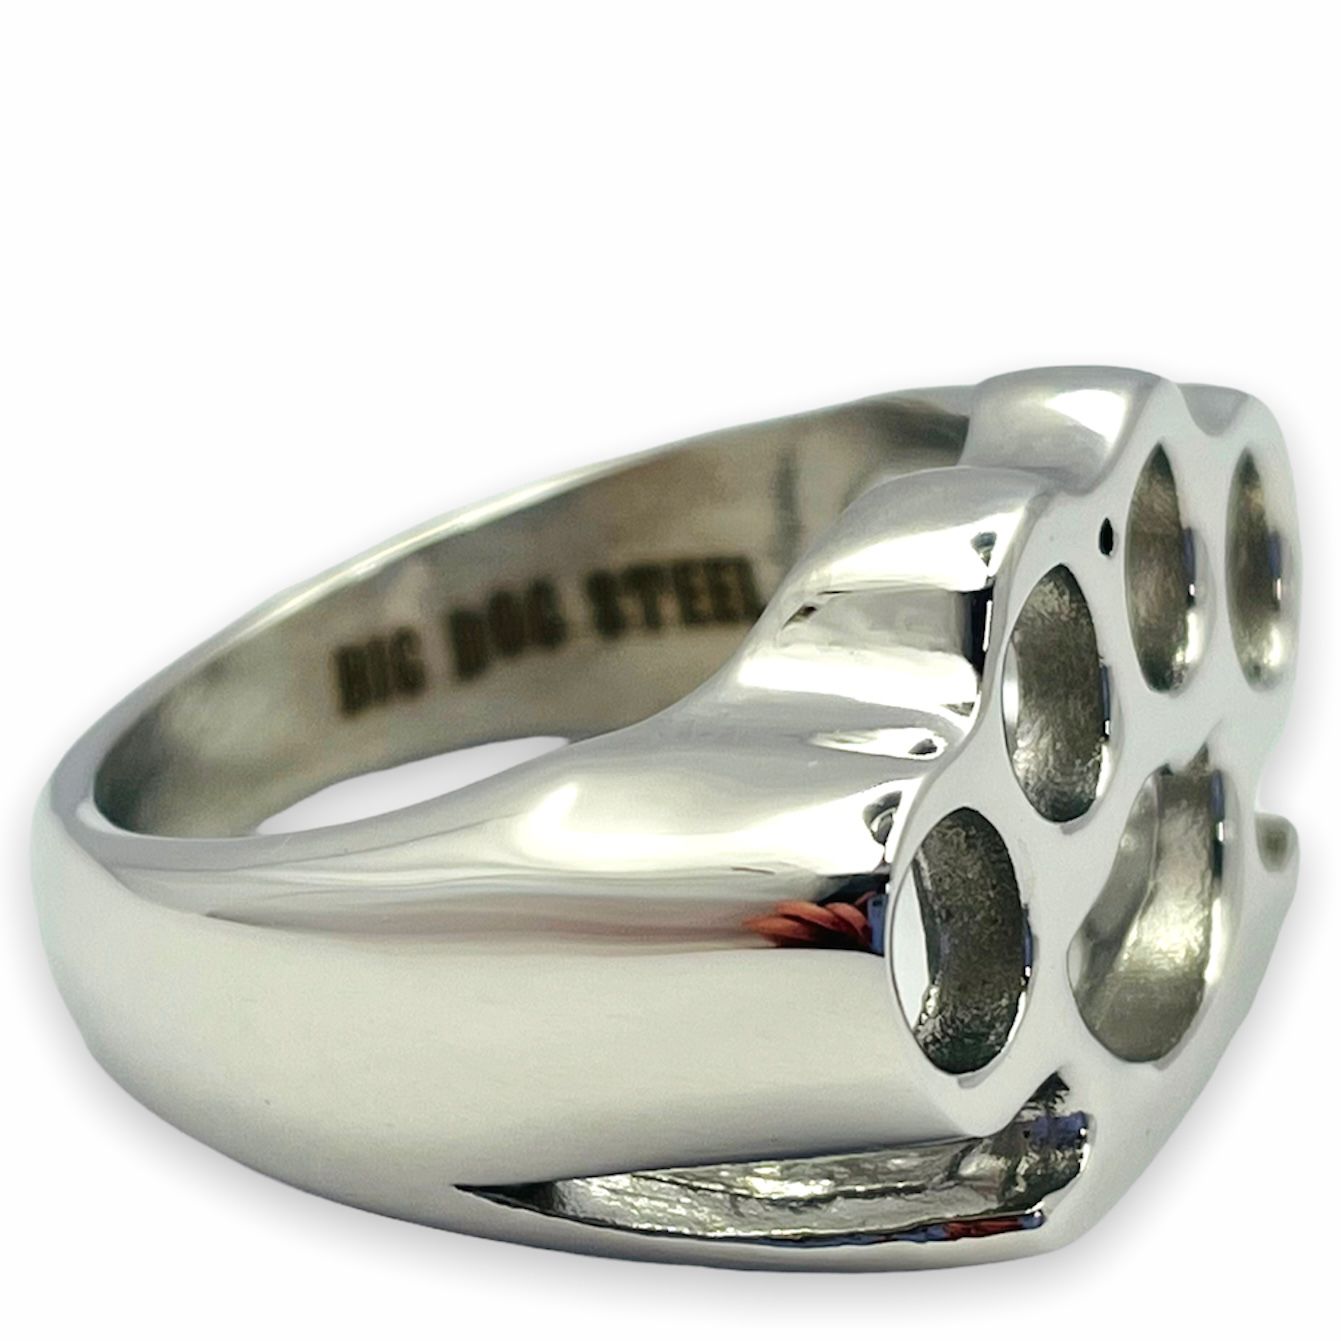 Ring in Stainless Steel